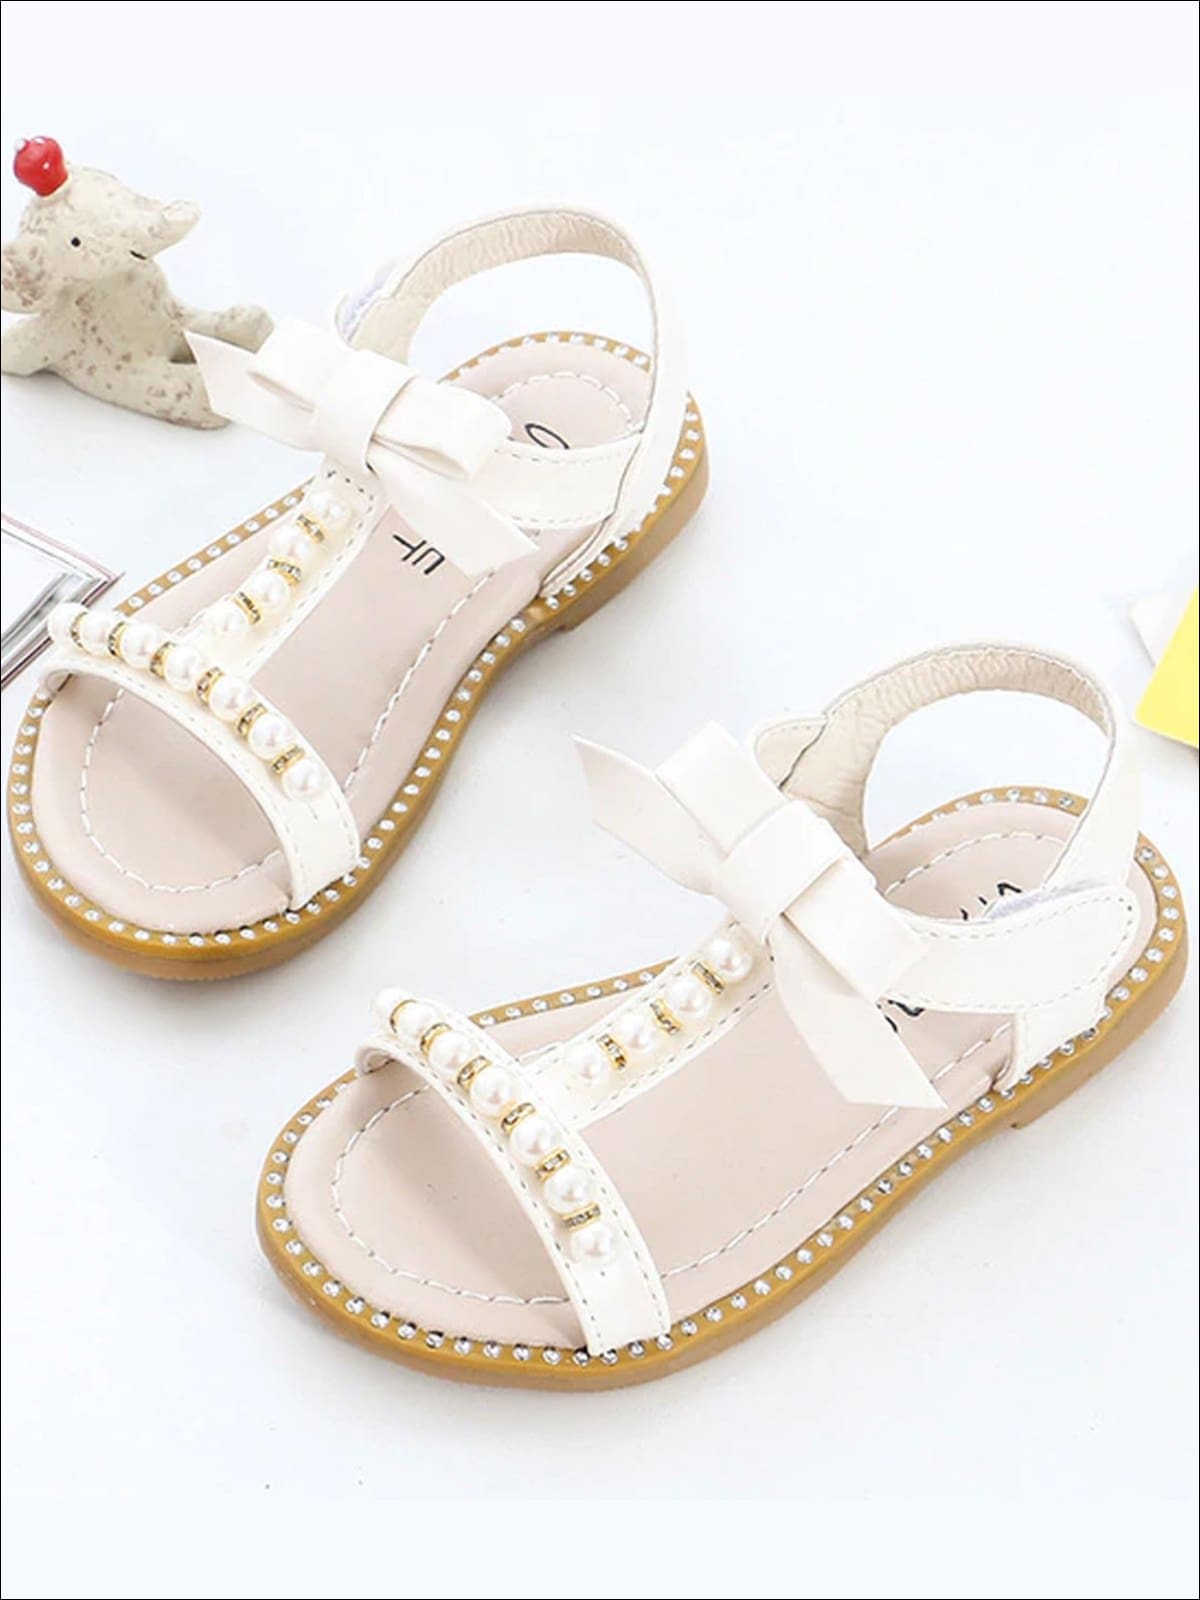 Girls Bow Strap Pearl Embellished Sandals - White / 6 - Girls Sandals